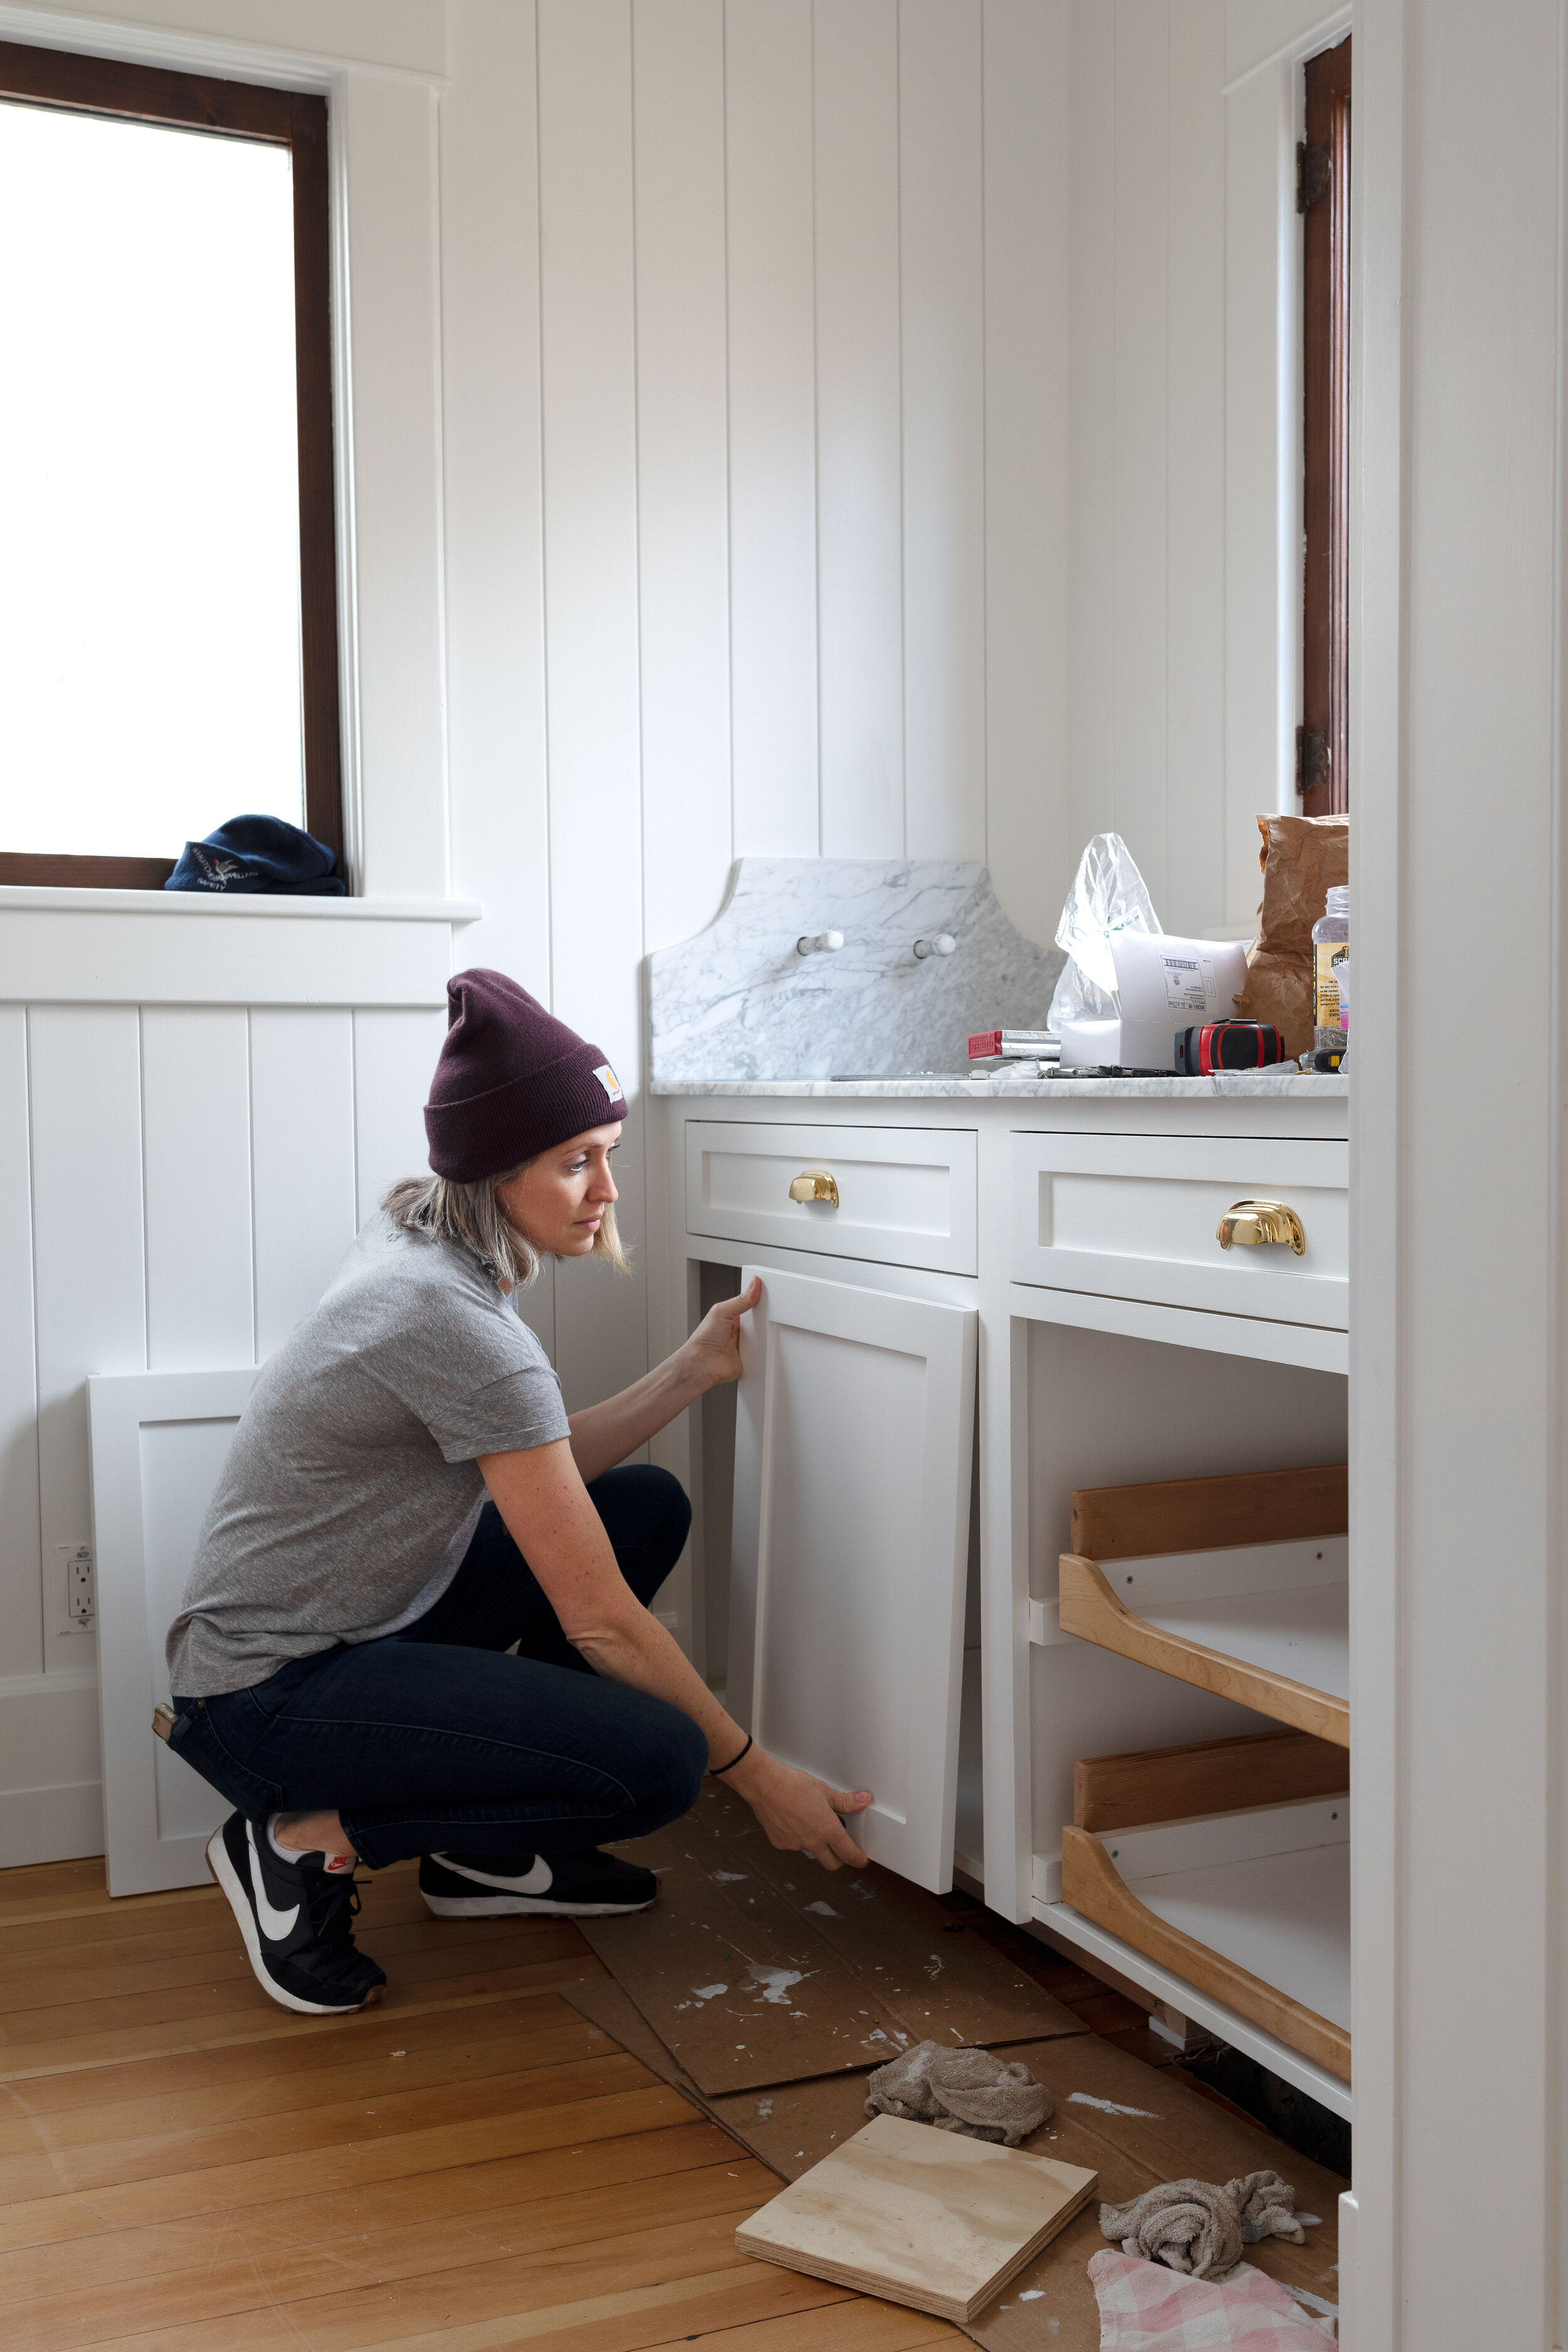 Diy How To Paint Cabinets By Hand, How To Hand Paint Cabinets